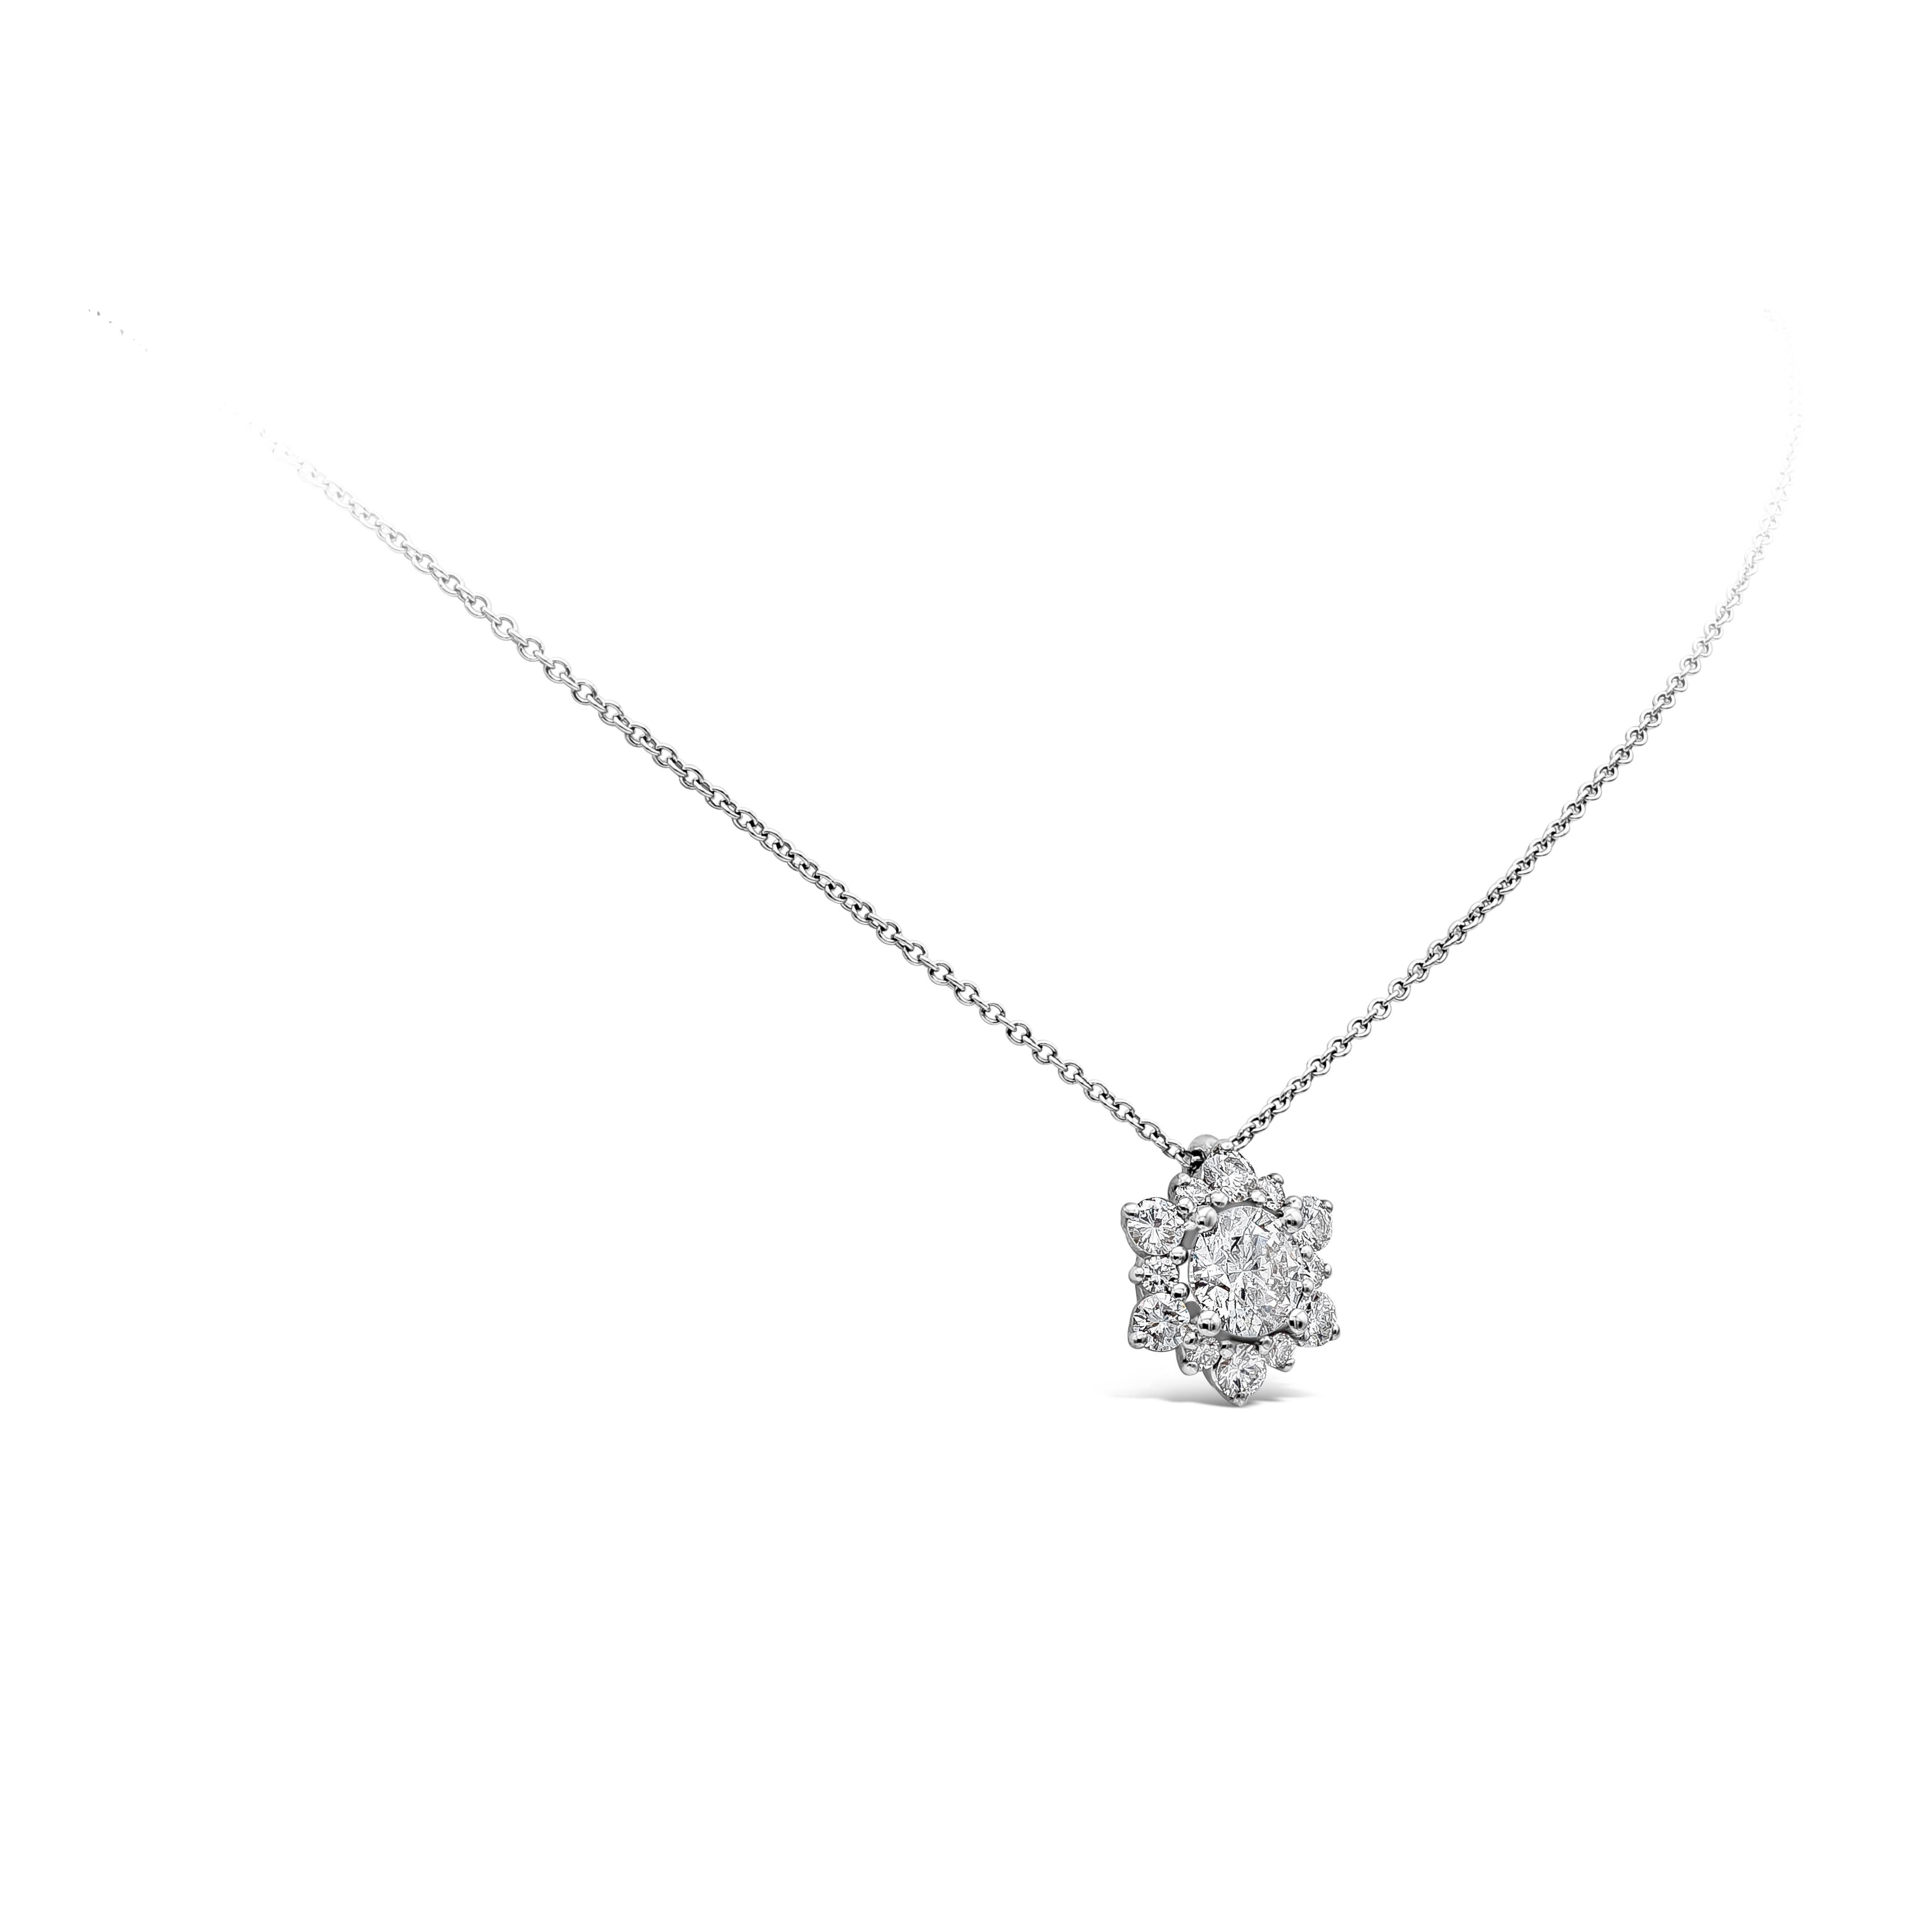 A simple and stunning pendant necklace showcasing a 0.76 carats round diamond center stone surrounded by dazzling diamond weighing 0. 49 carats total in a intricate halo starburst design. Finely made in 18K White gold and suspended on a 16 inches